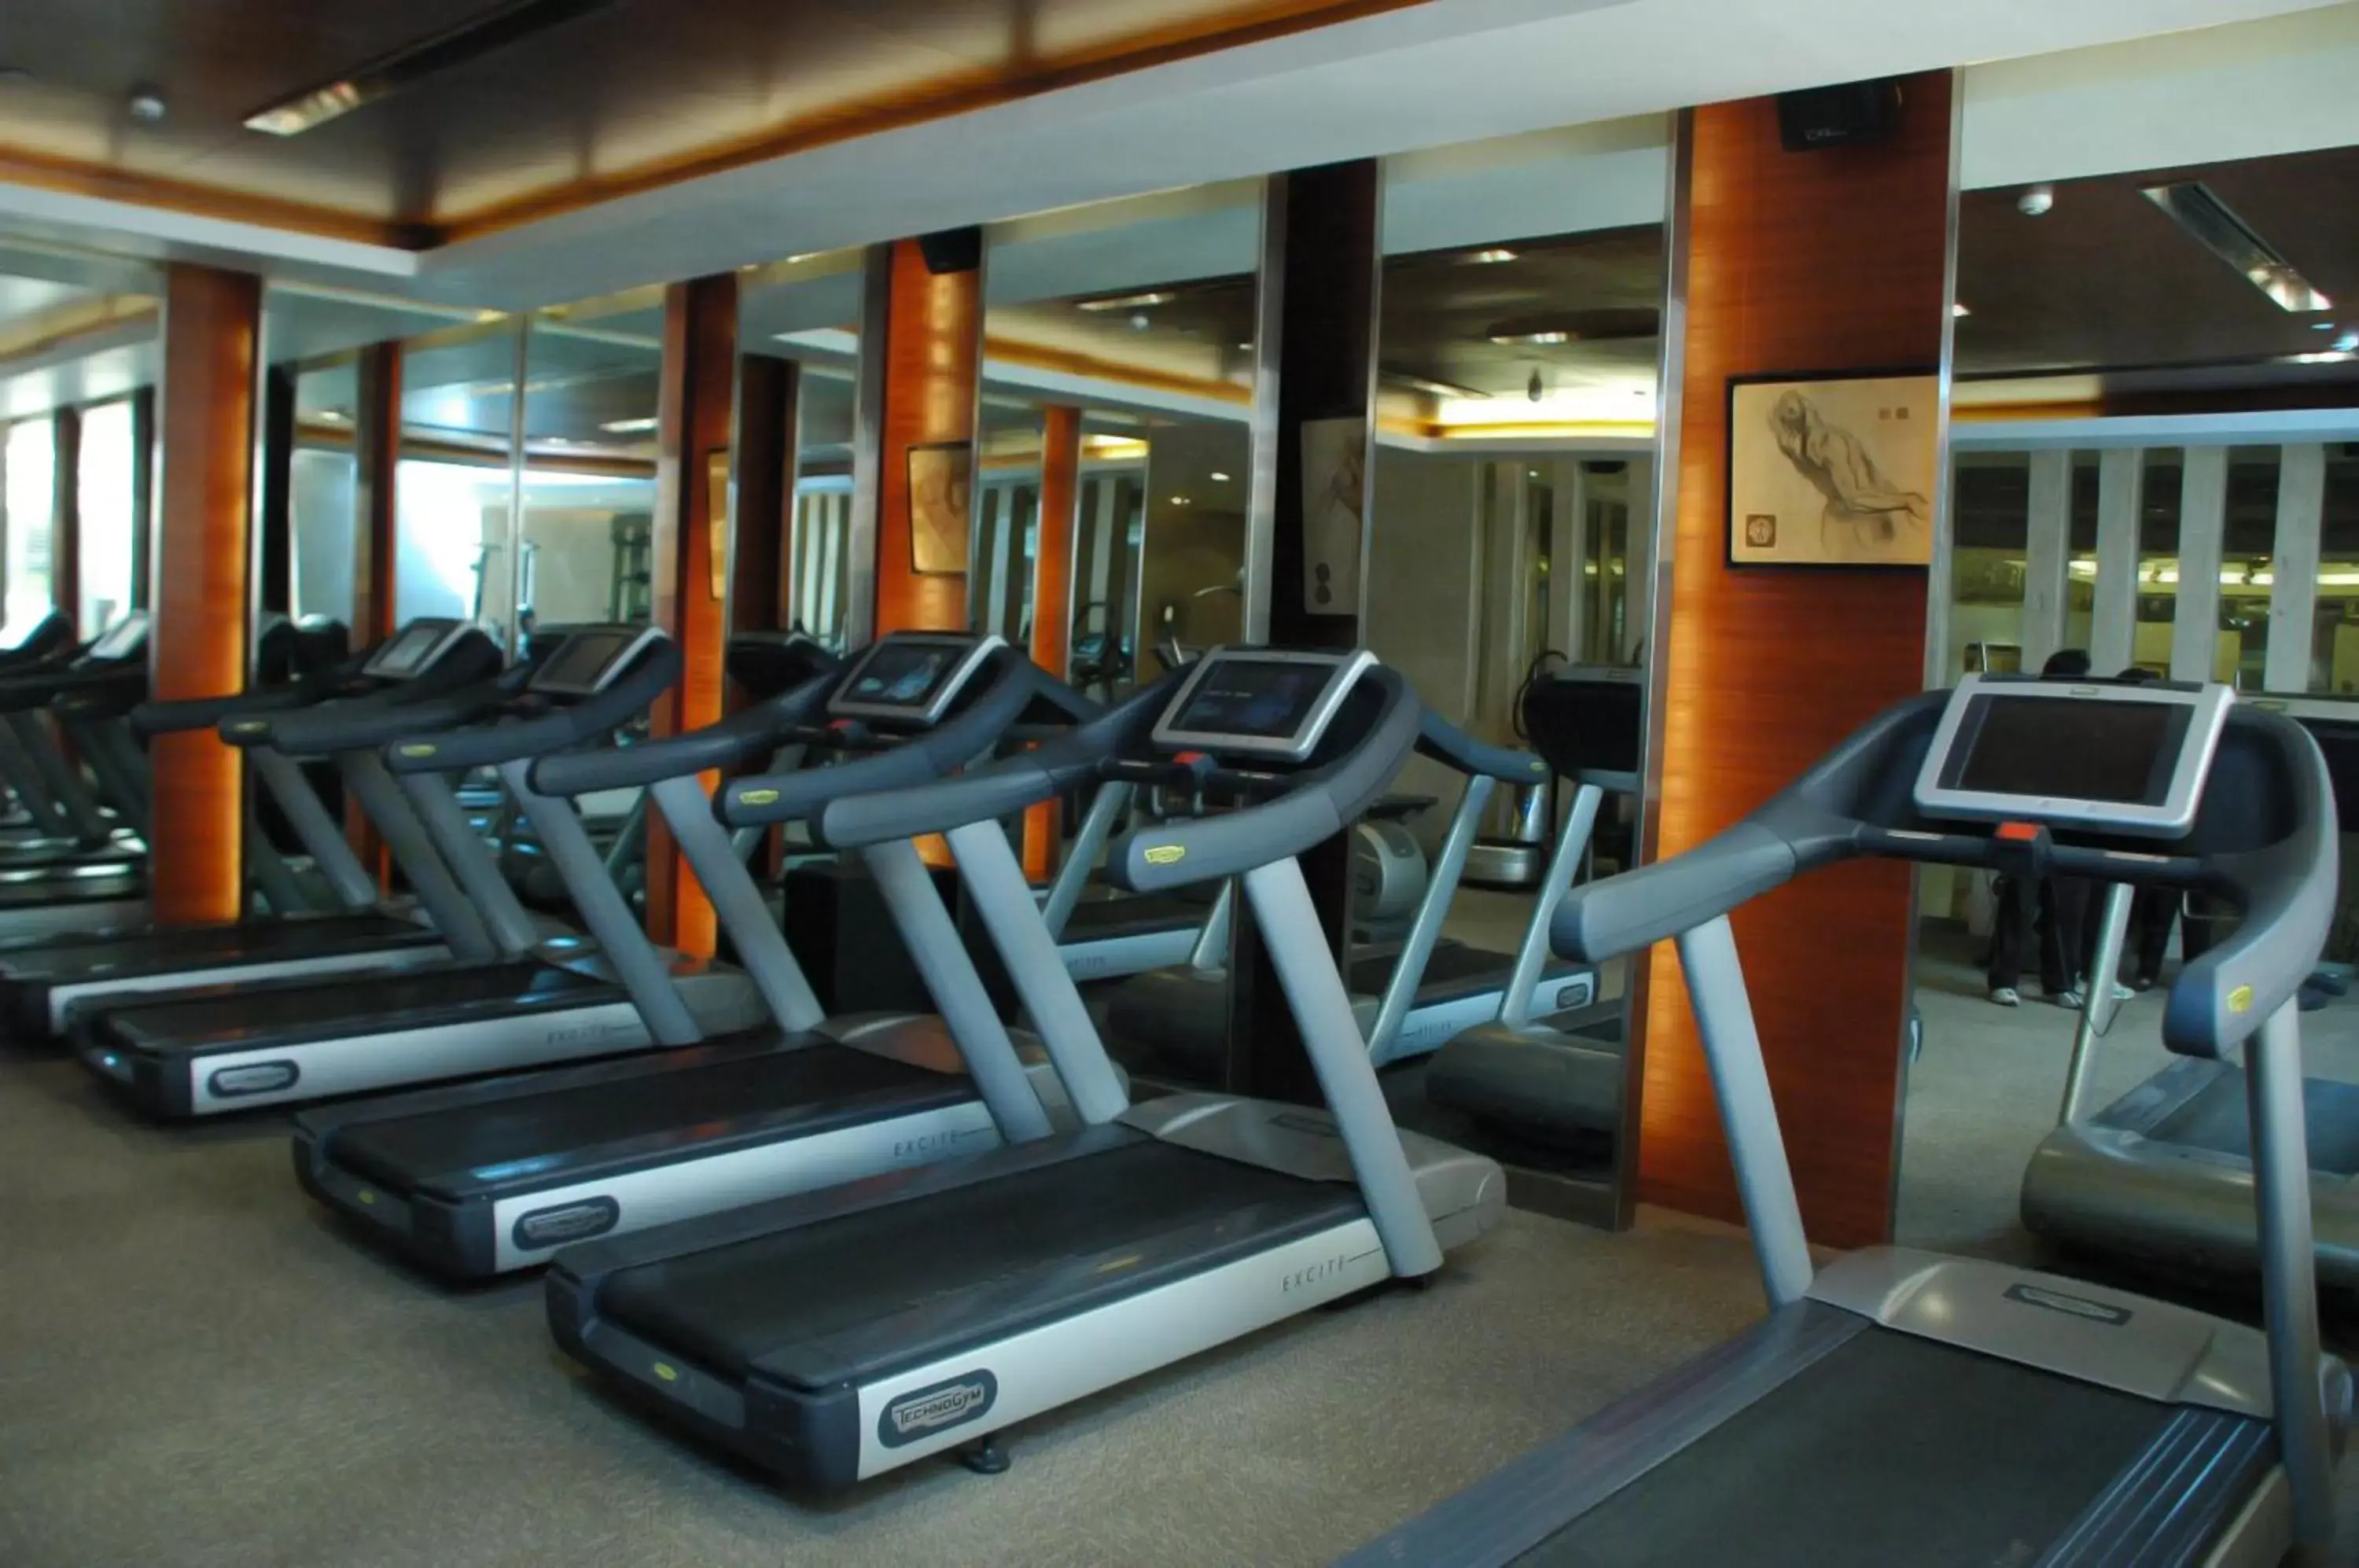 Fitness centre/facilities, Fitness Center/Facilities in The LaLiT New Delhi